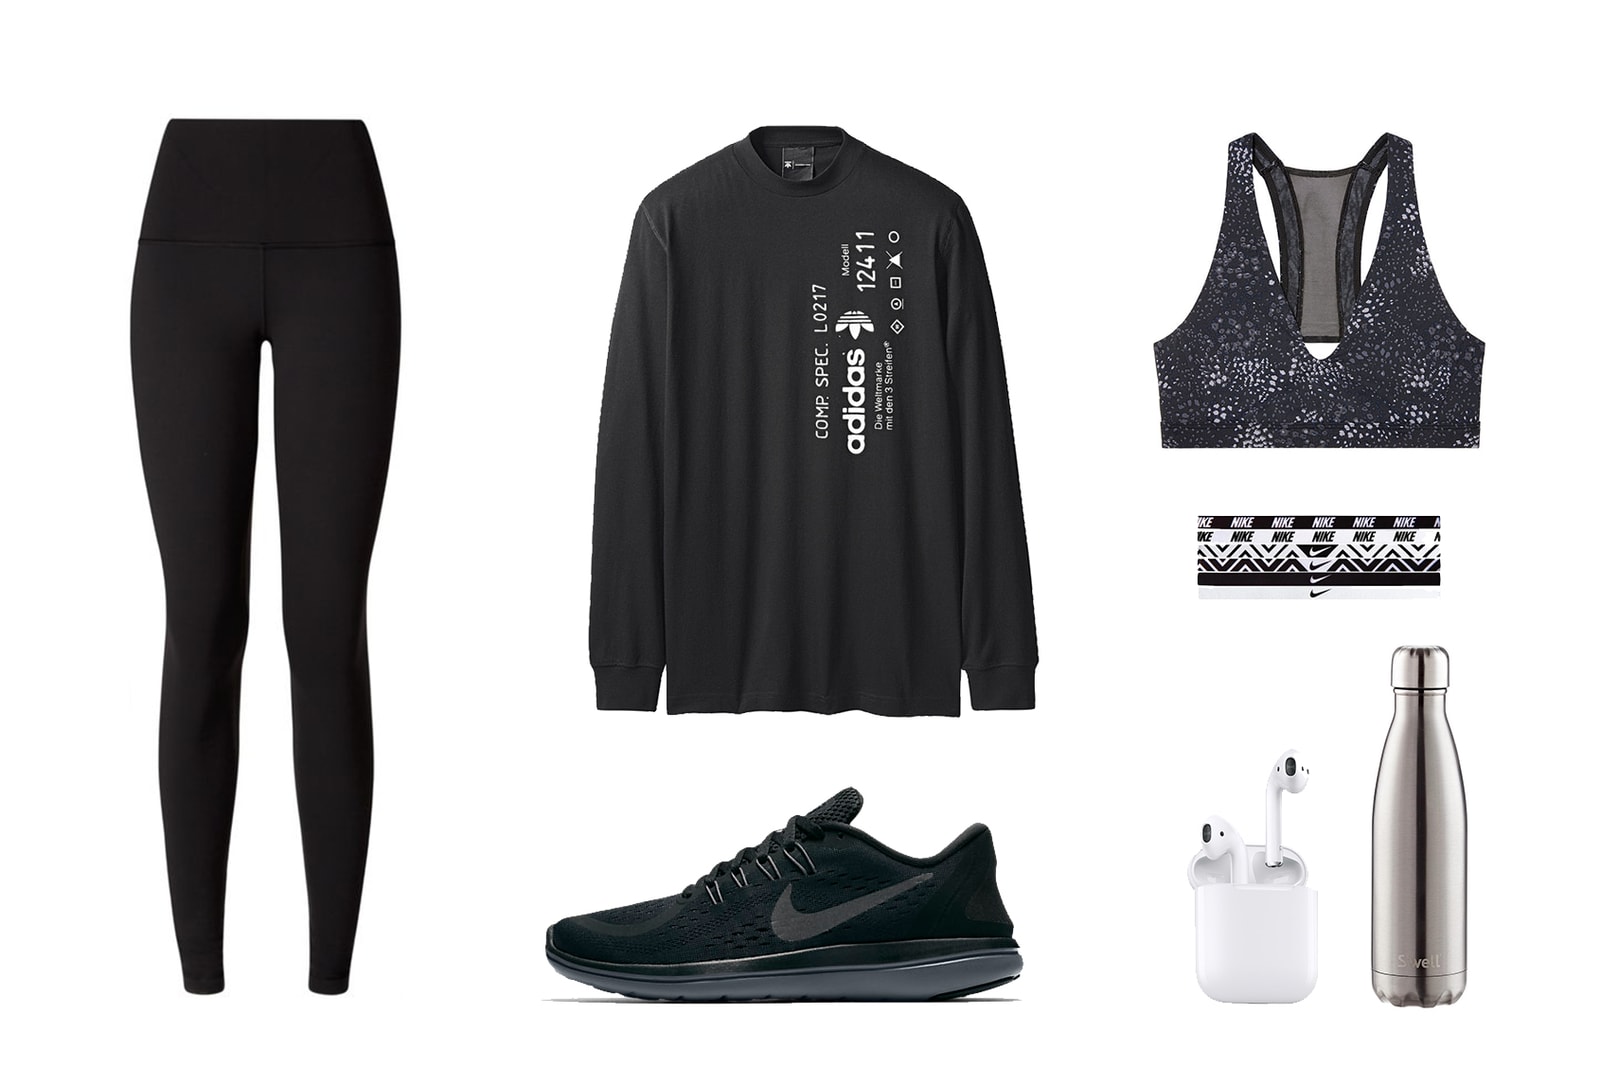 How To Look Stylish In Workout Gear Editors Guide Inspiration Workout Fitspo Nike adidas Alexander Wang Running Uniqlo Swell Water Bottle Kara Lululemon Victorias Secret